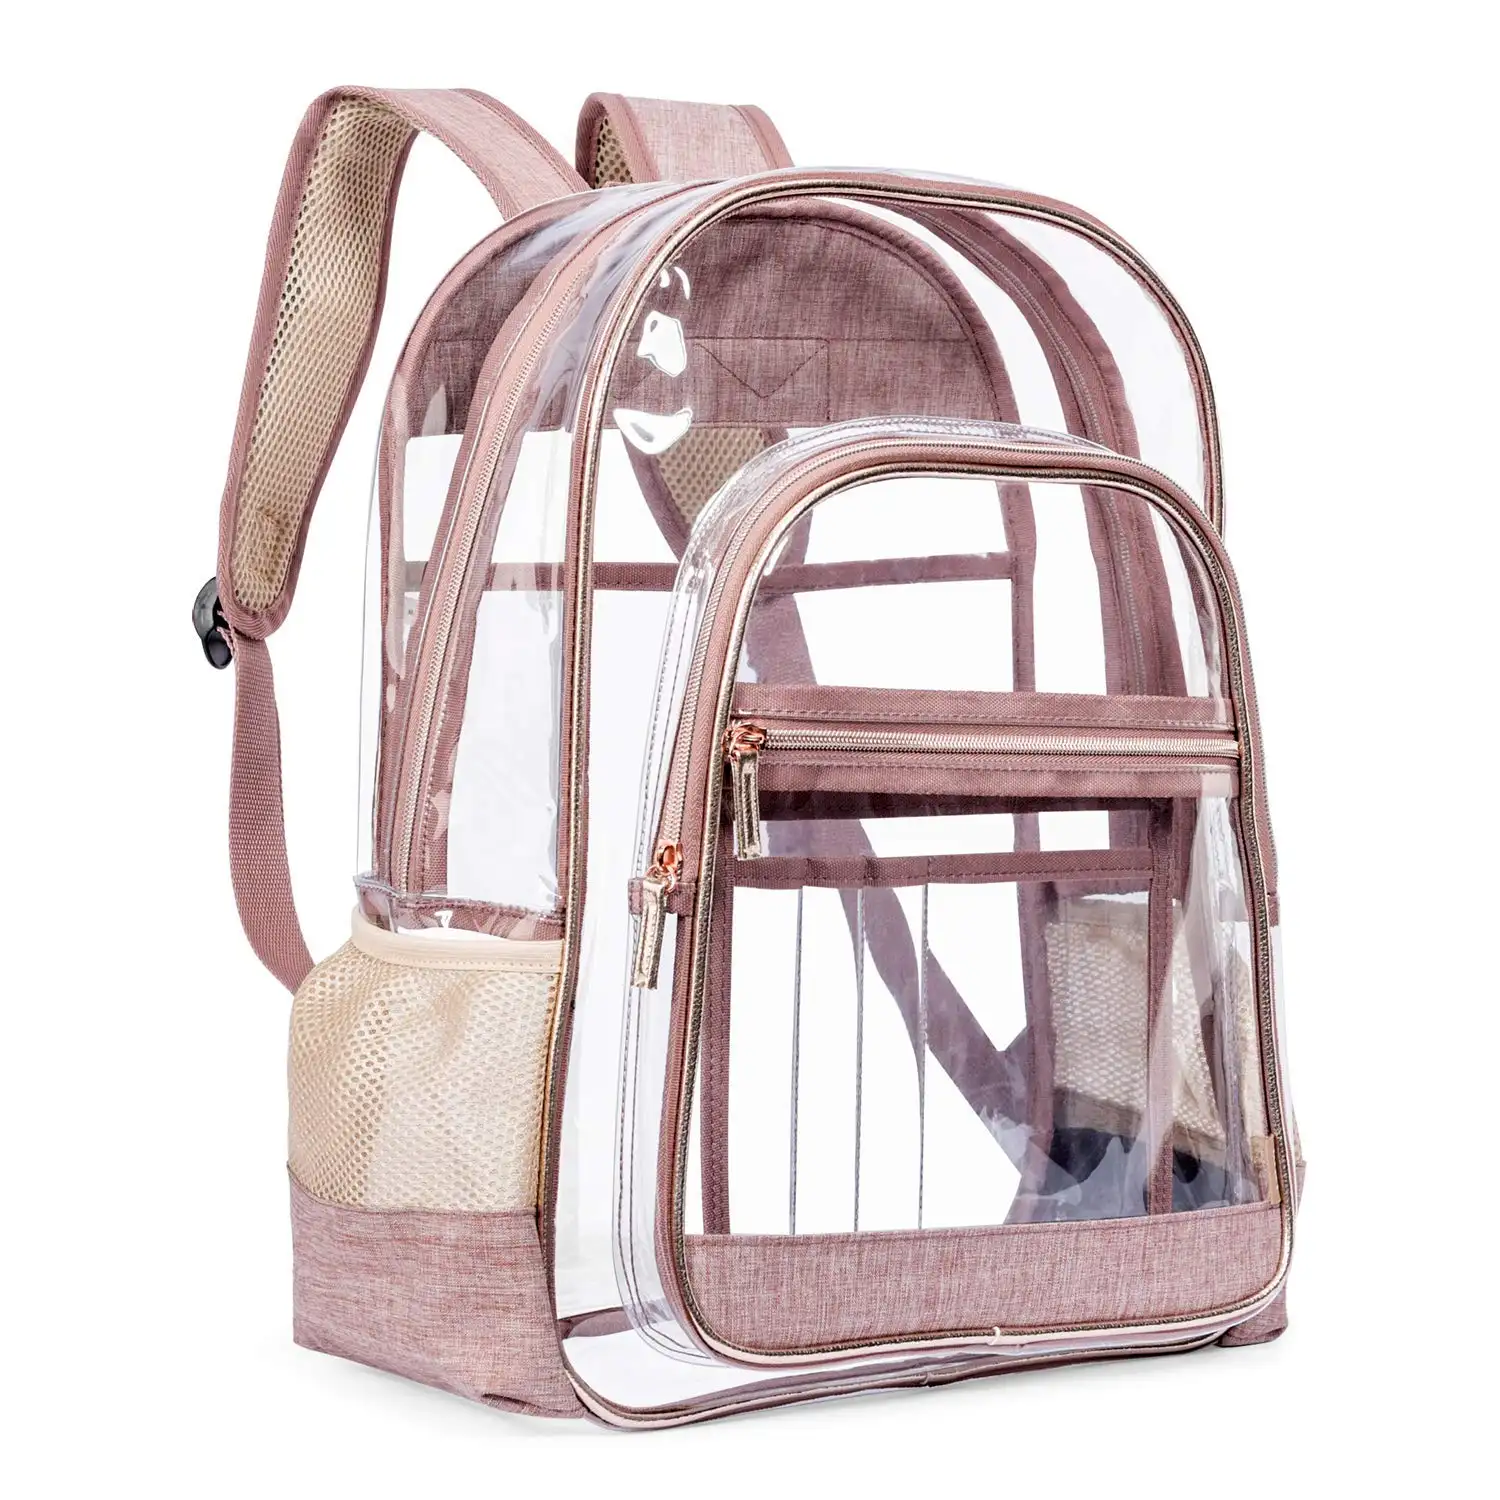 Heavy Duty Clear Transparent Pvc Backpack See Through Backpack Pvc School Bags And Backpacks For Girls